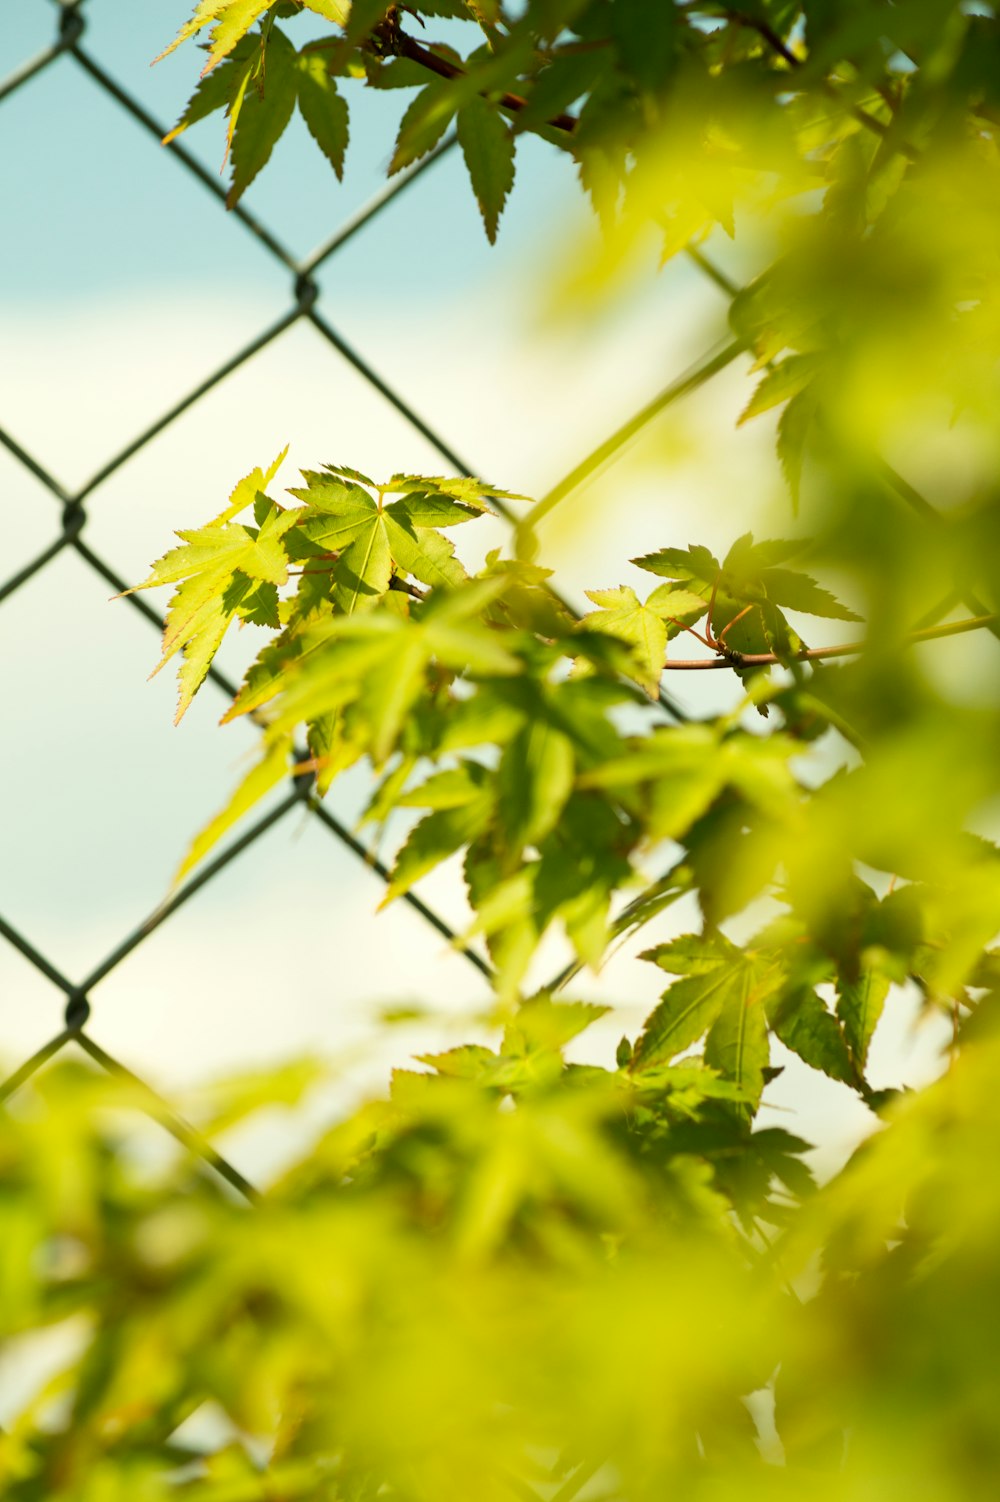 close up photography of green leafed plant beside wire fence